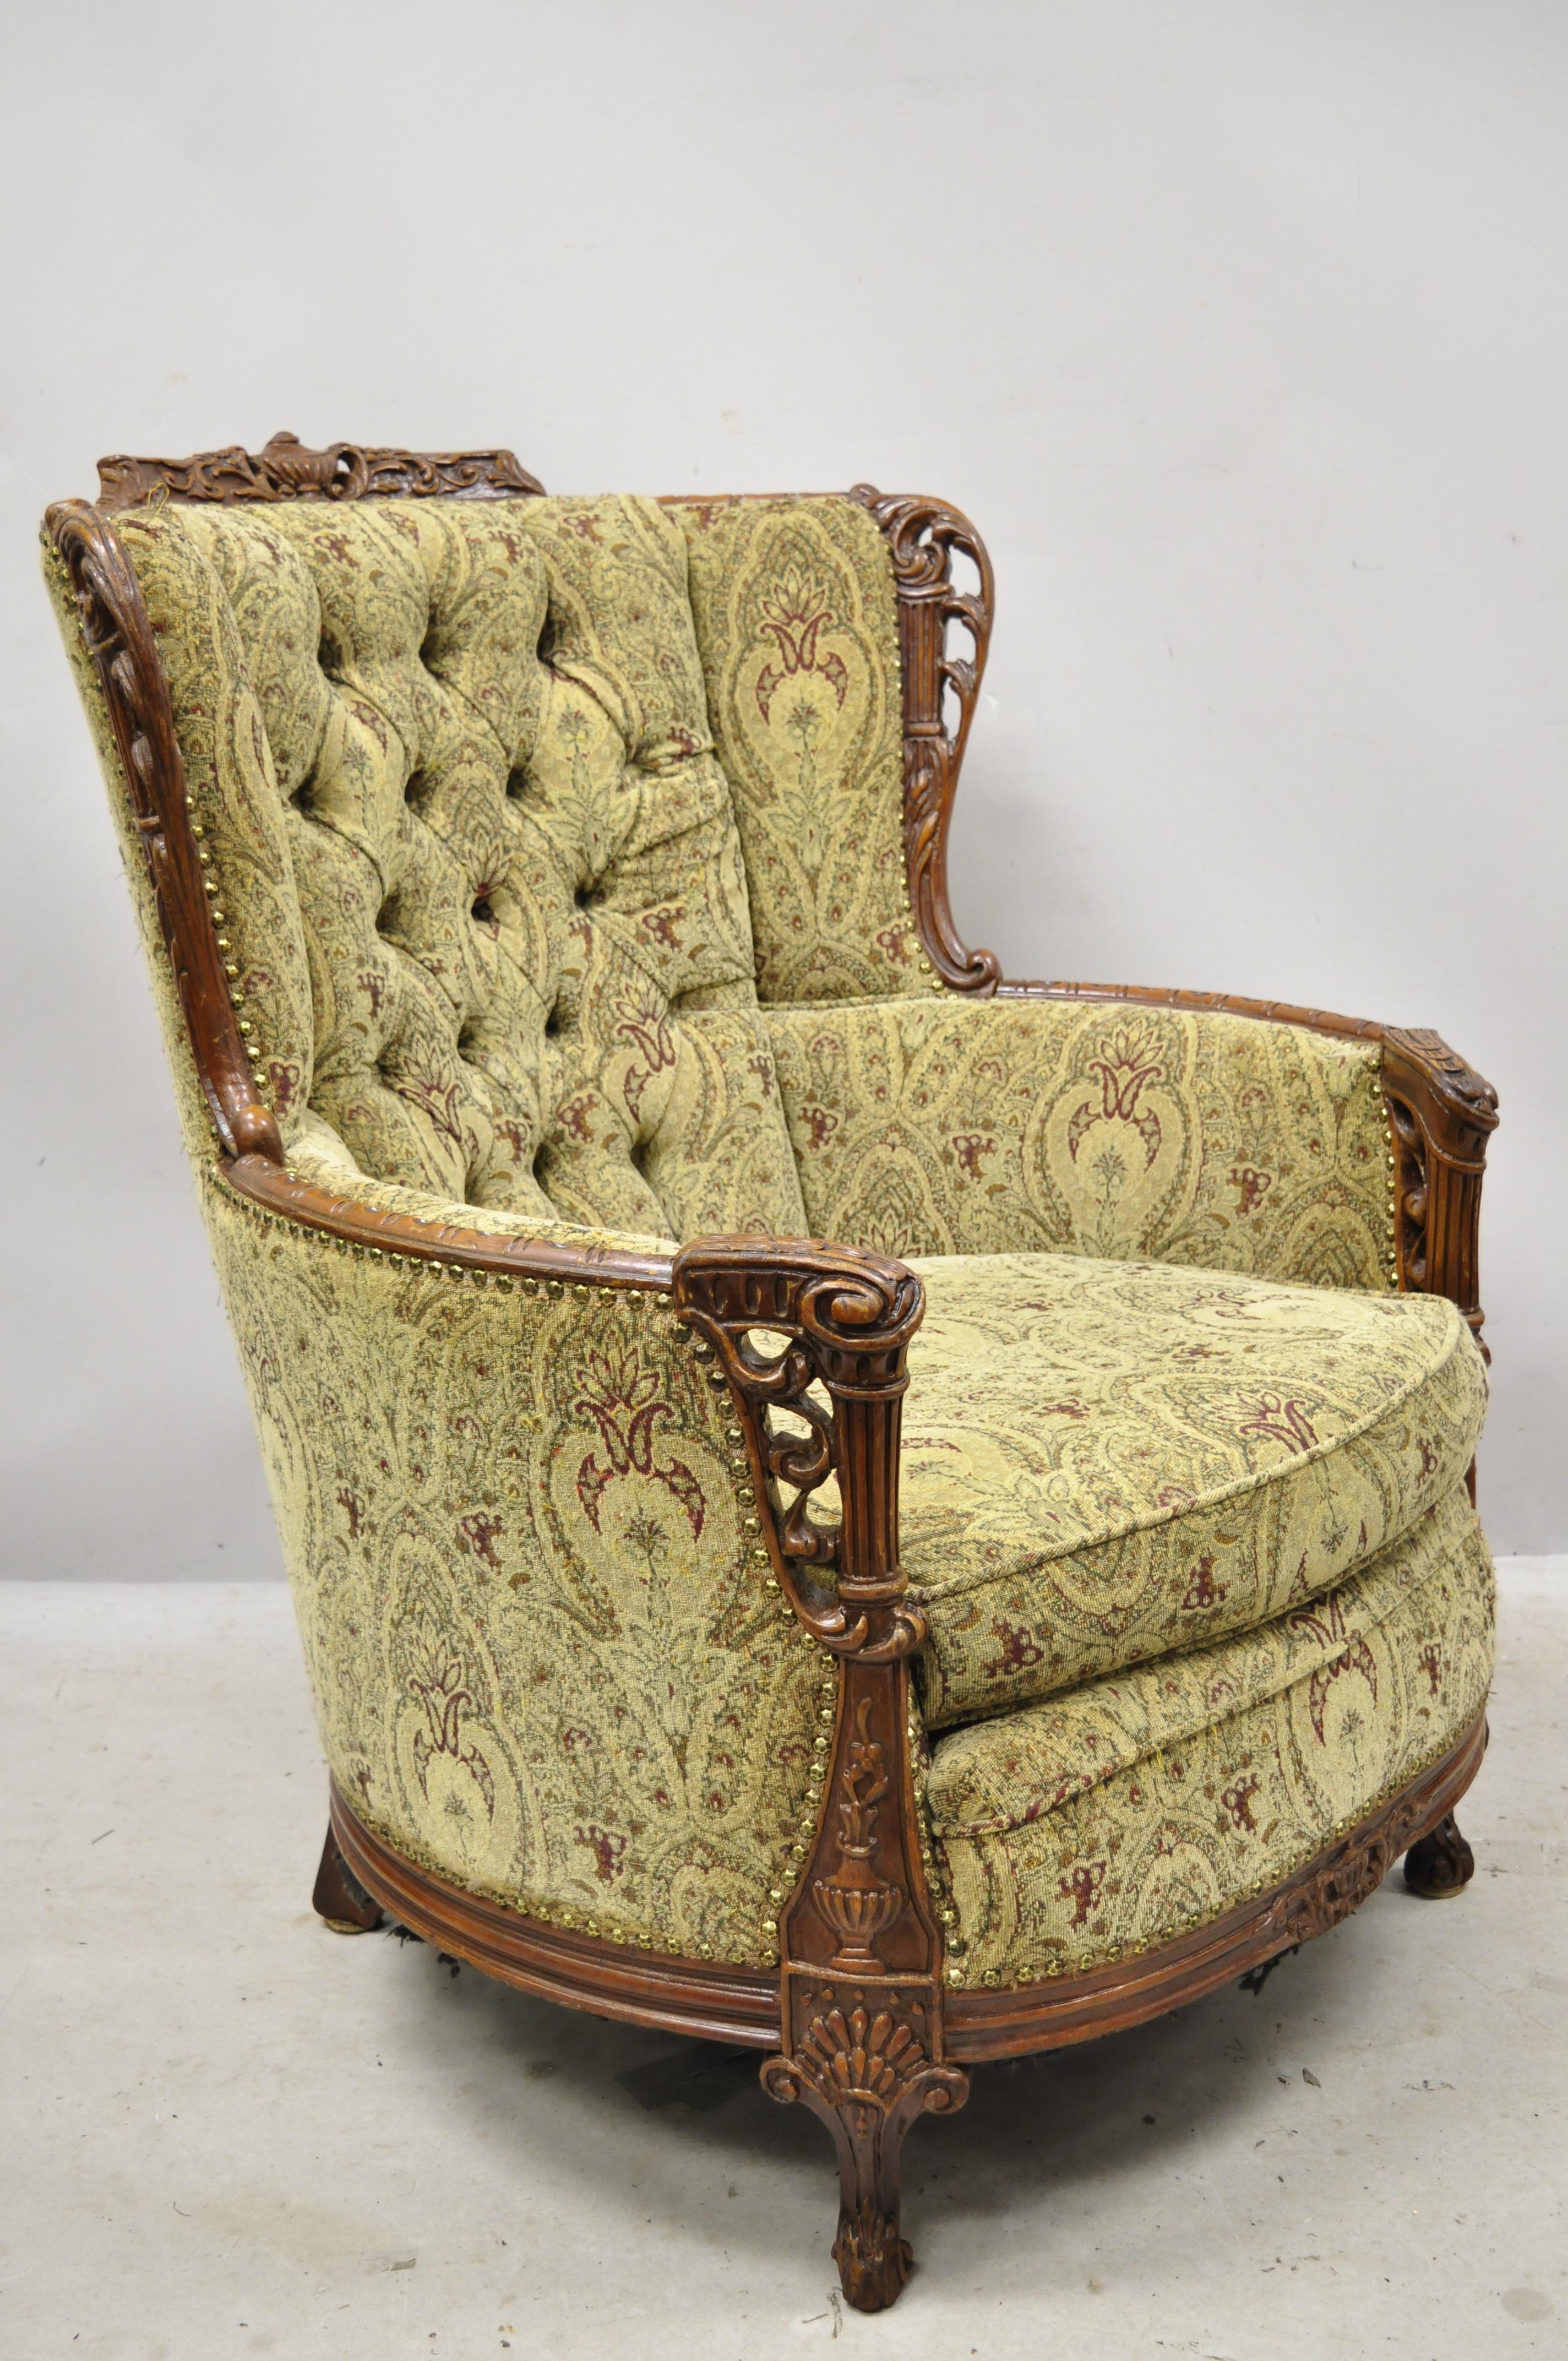 Antique French style Victorian carved mahogany flame urn wingback parlor lounge chair. Item features solid wood frame, nicely carved details, very nice antique item, great style and form, circa early 1900s. Measurements: 41